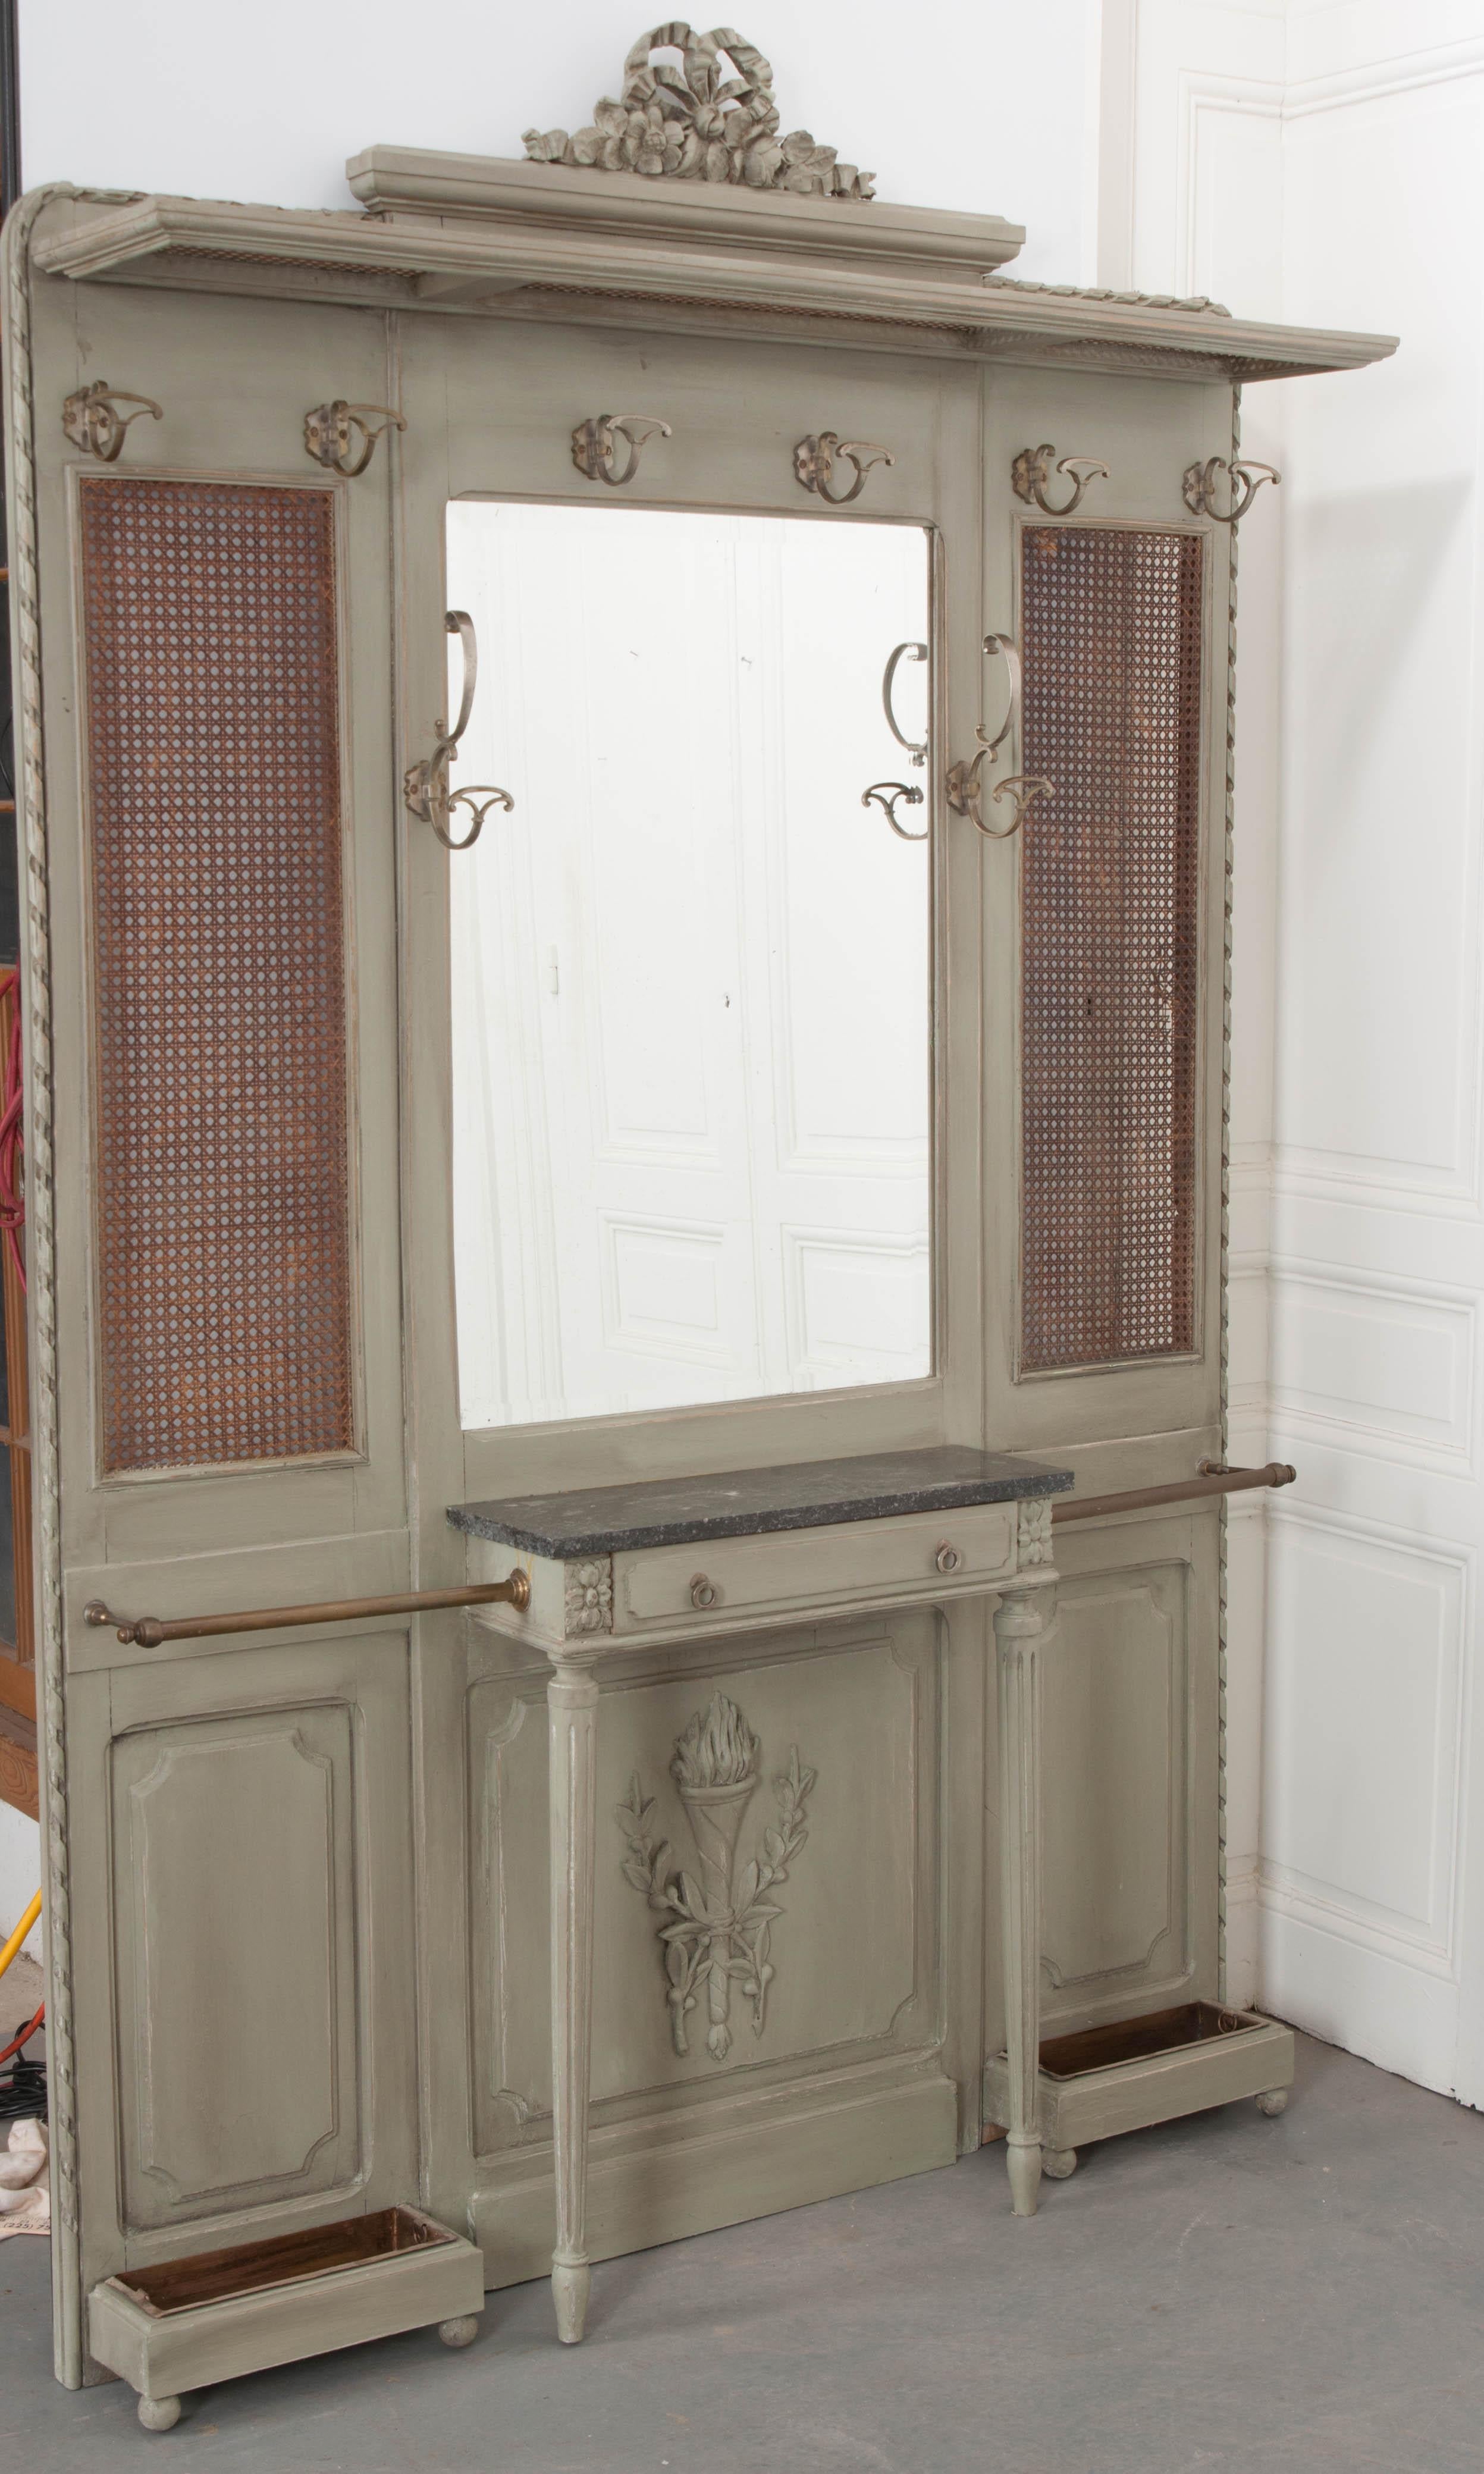 An impressive Louis XVI style hall tree from 19th century France. The antique has a centrally located mirror with an panel on each side. Each panel is backed in woven cane and has a brass rail and drip pan for storing umbrellas. The mirror has its